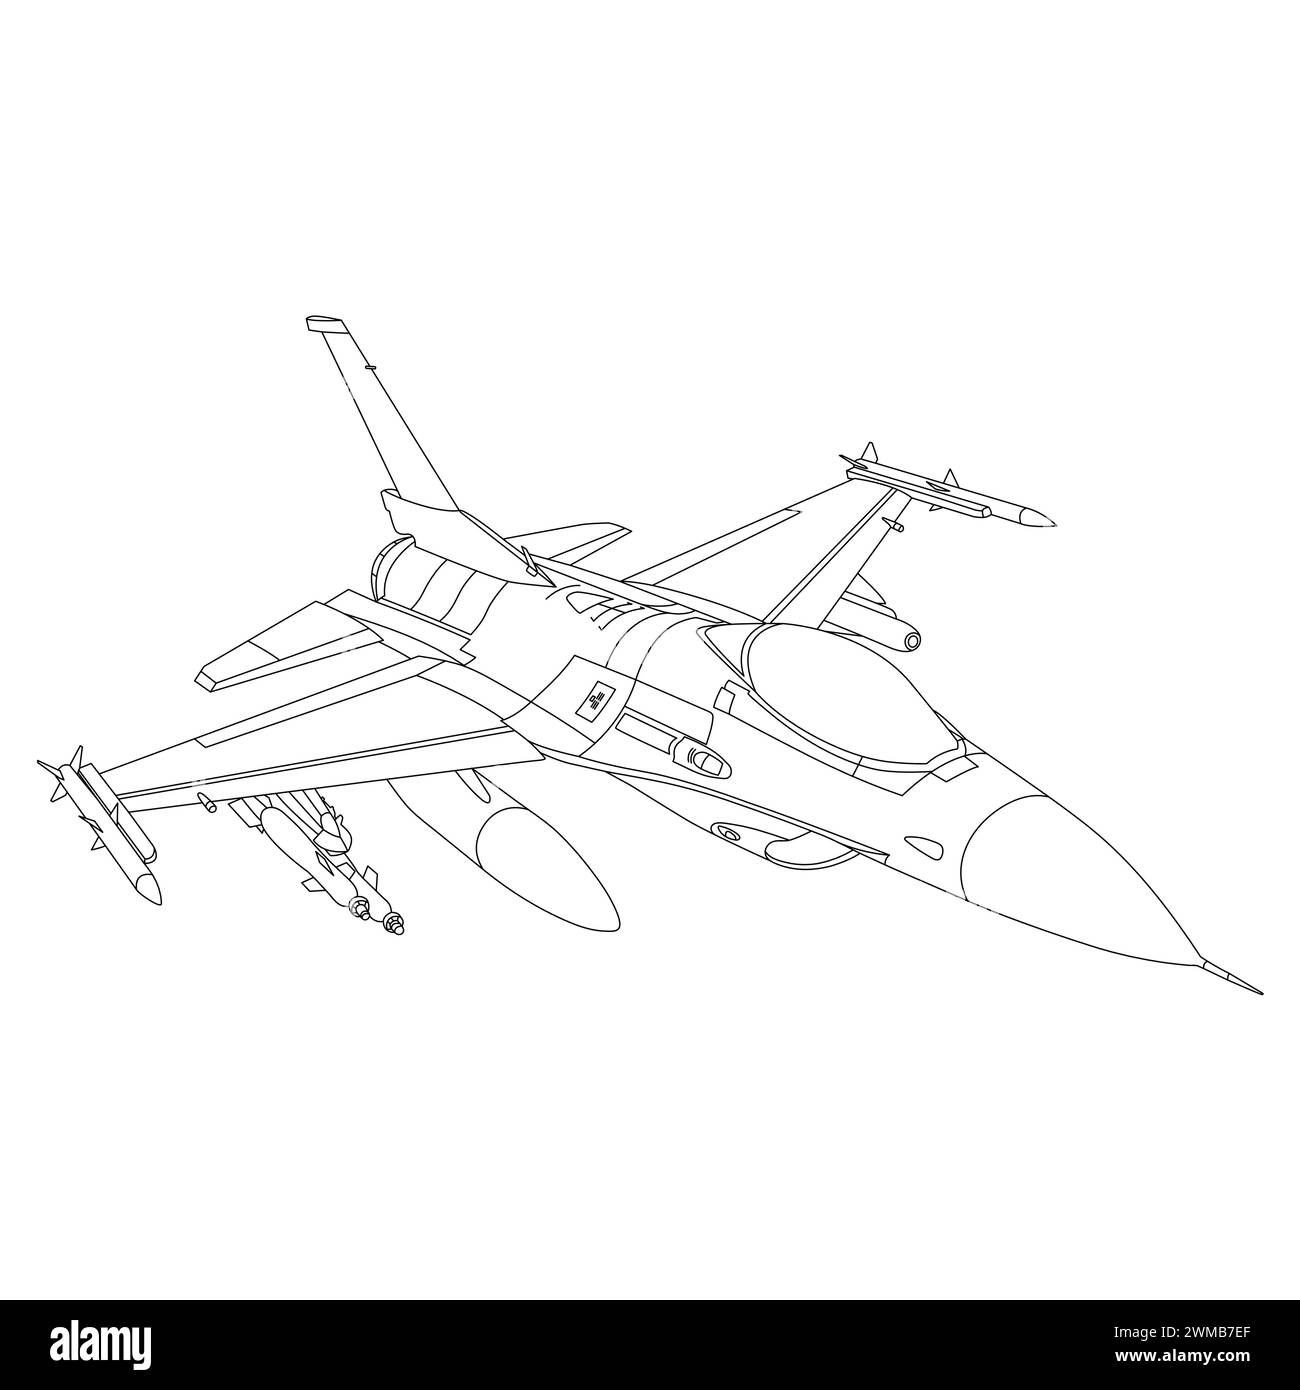 F-16 Fighting Falcon Outline Illustration. Fighter Jet F16 Coloring Book For Children And Adults. Military Aircraft Vector. Cartoon Airplane Isolated Stock Vector